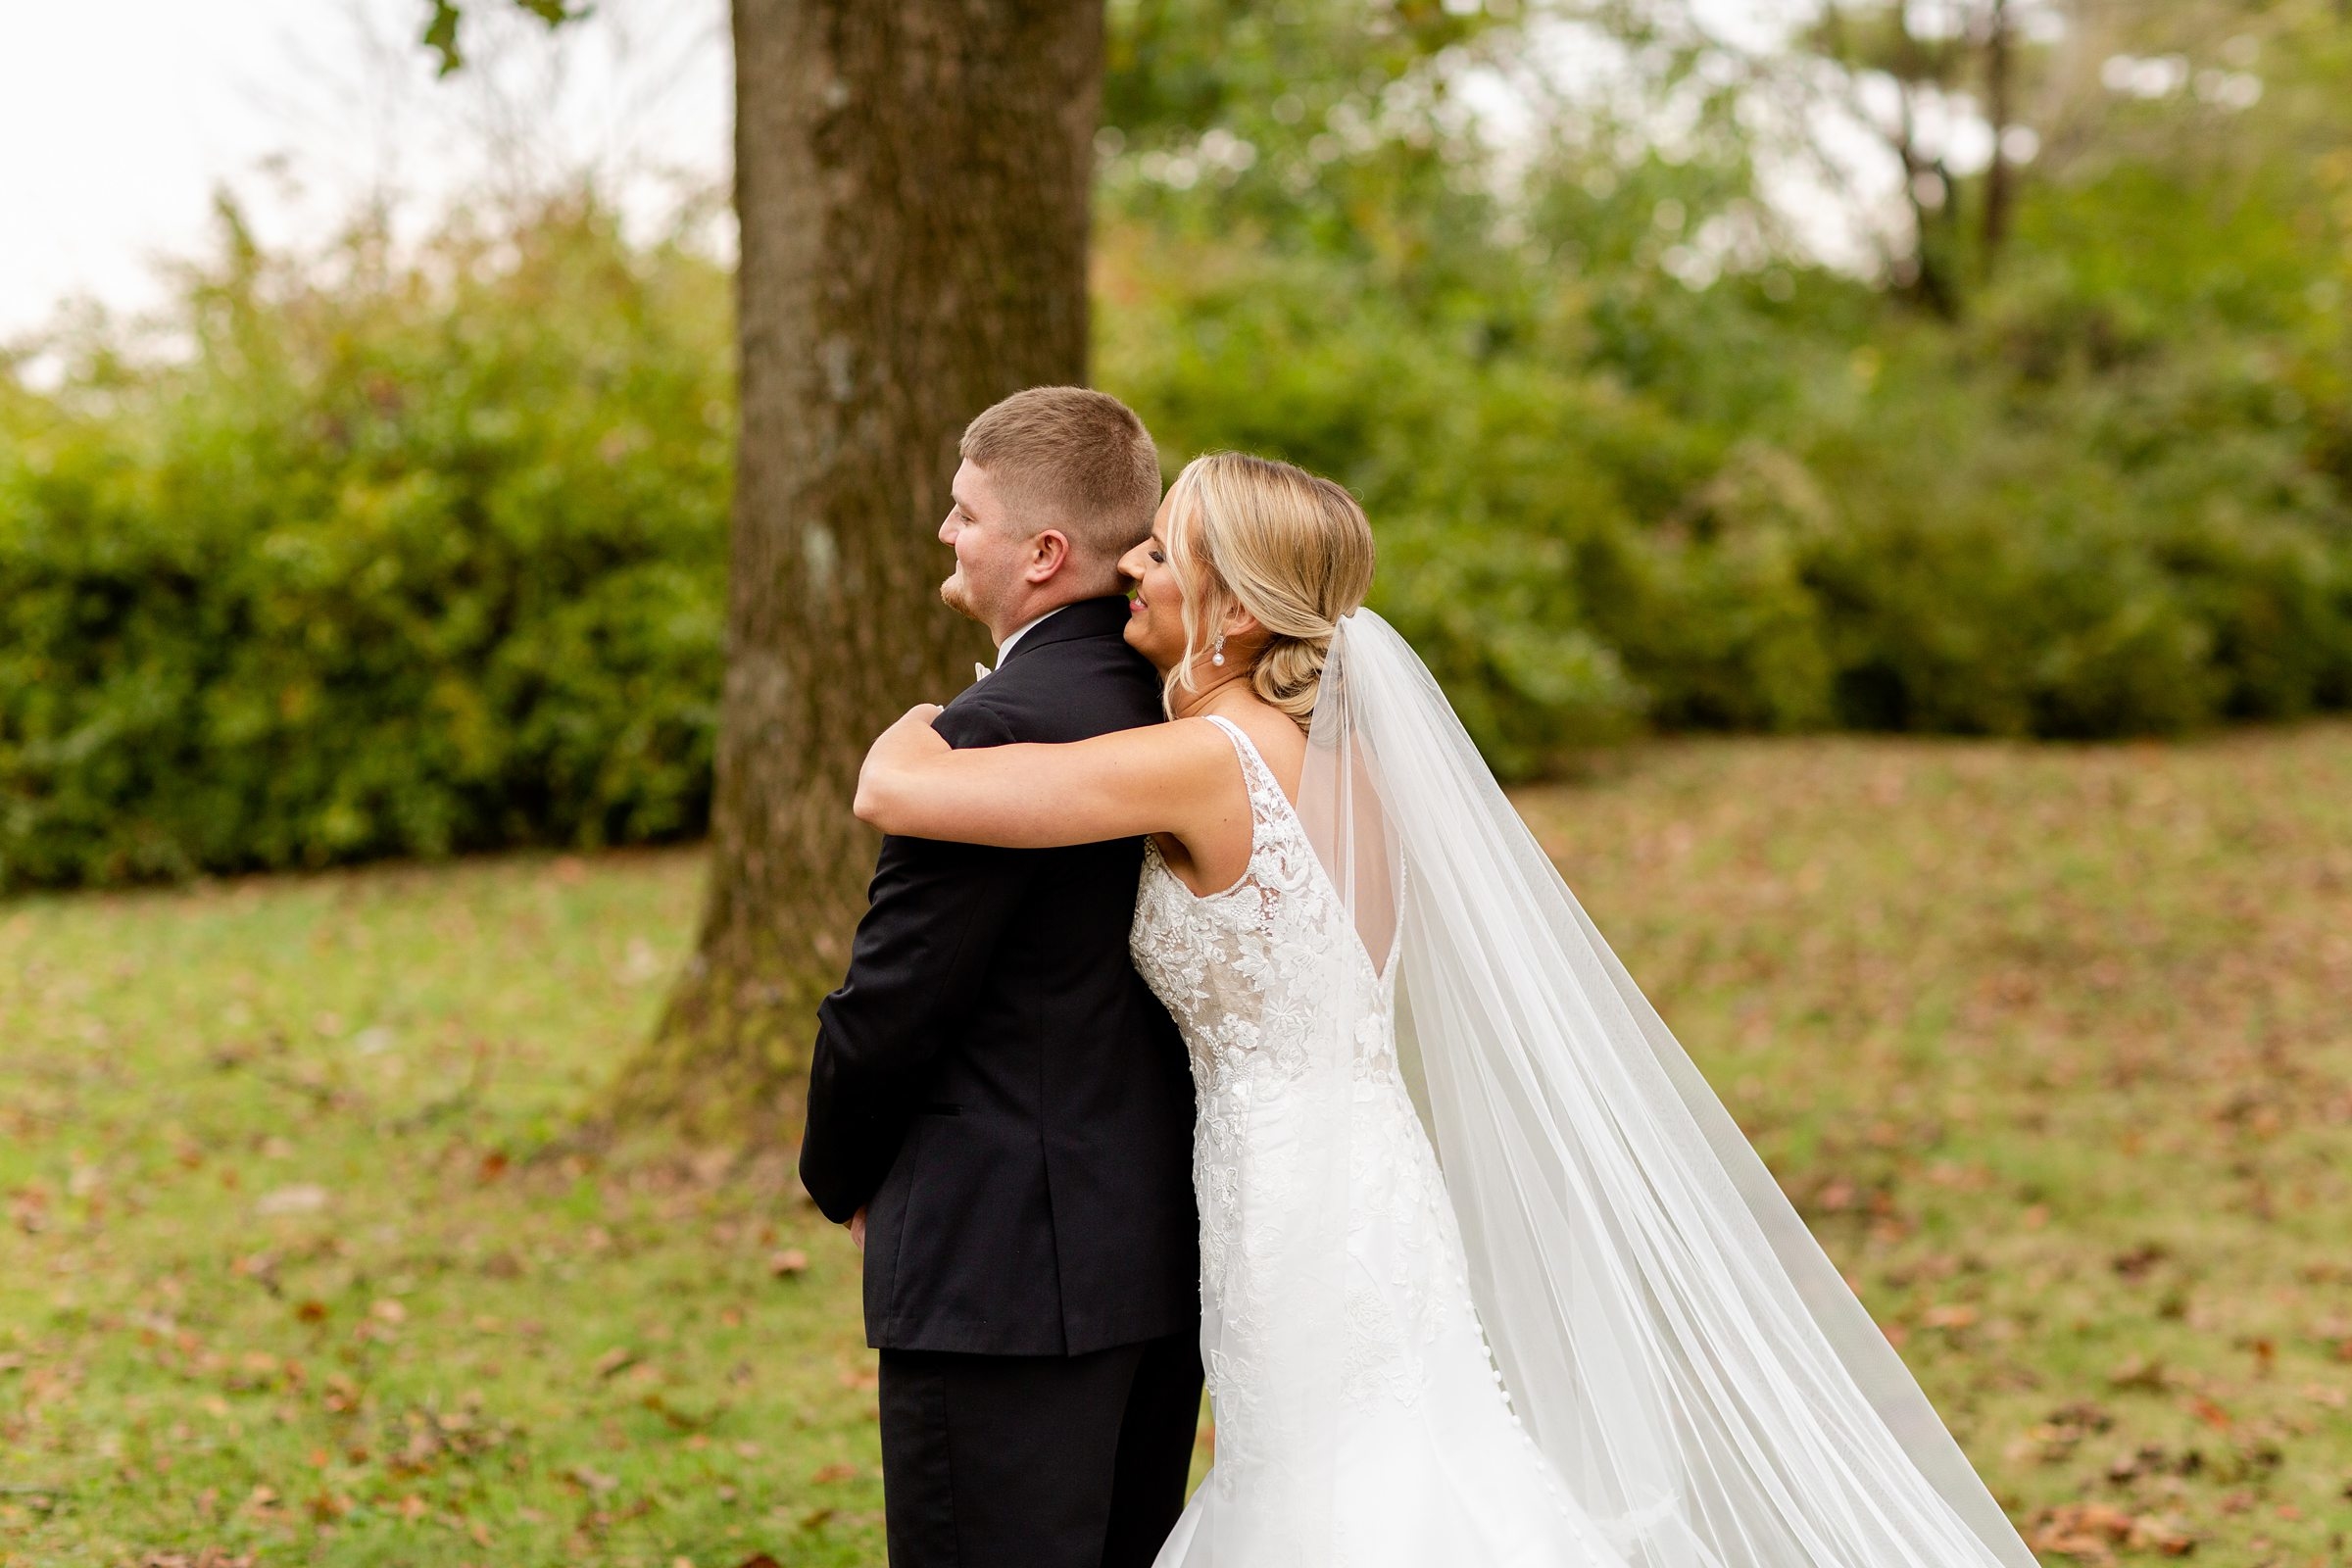 Hannah and Cody's Wedding in Booneville, IN062.jpg